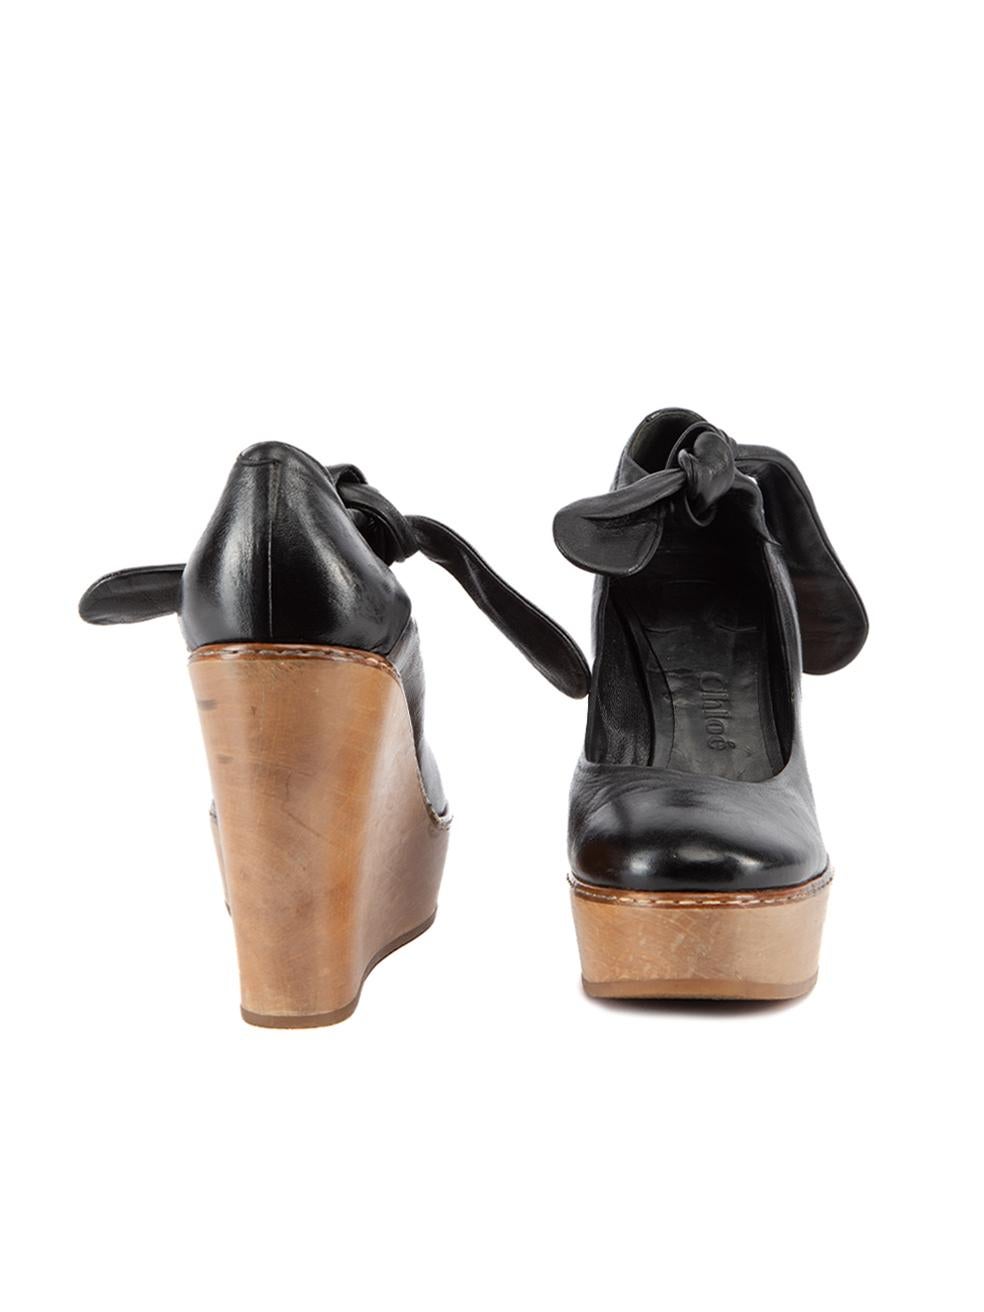 Pre-Loved Chloé Women's Black Wood Heel Tie Ankle Wedges In Excellent Condition In London, GB